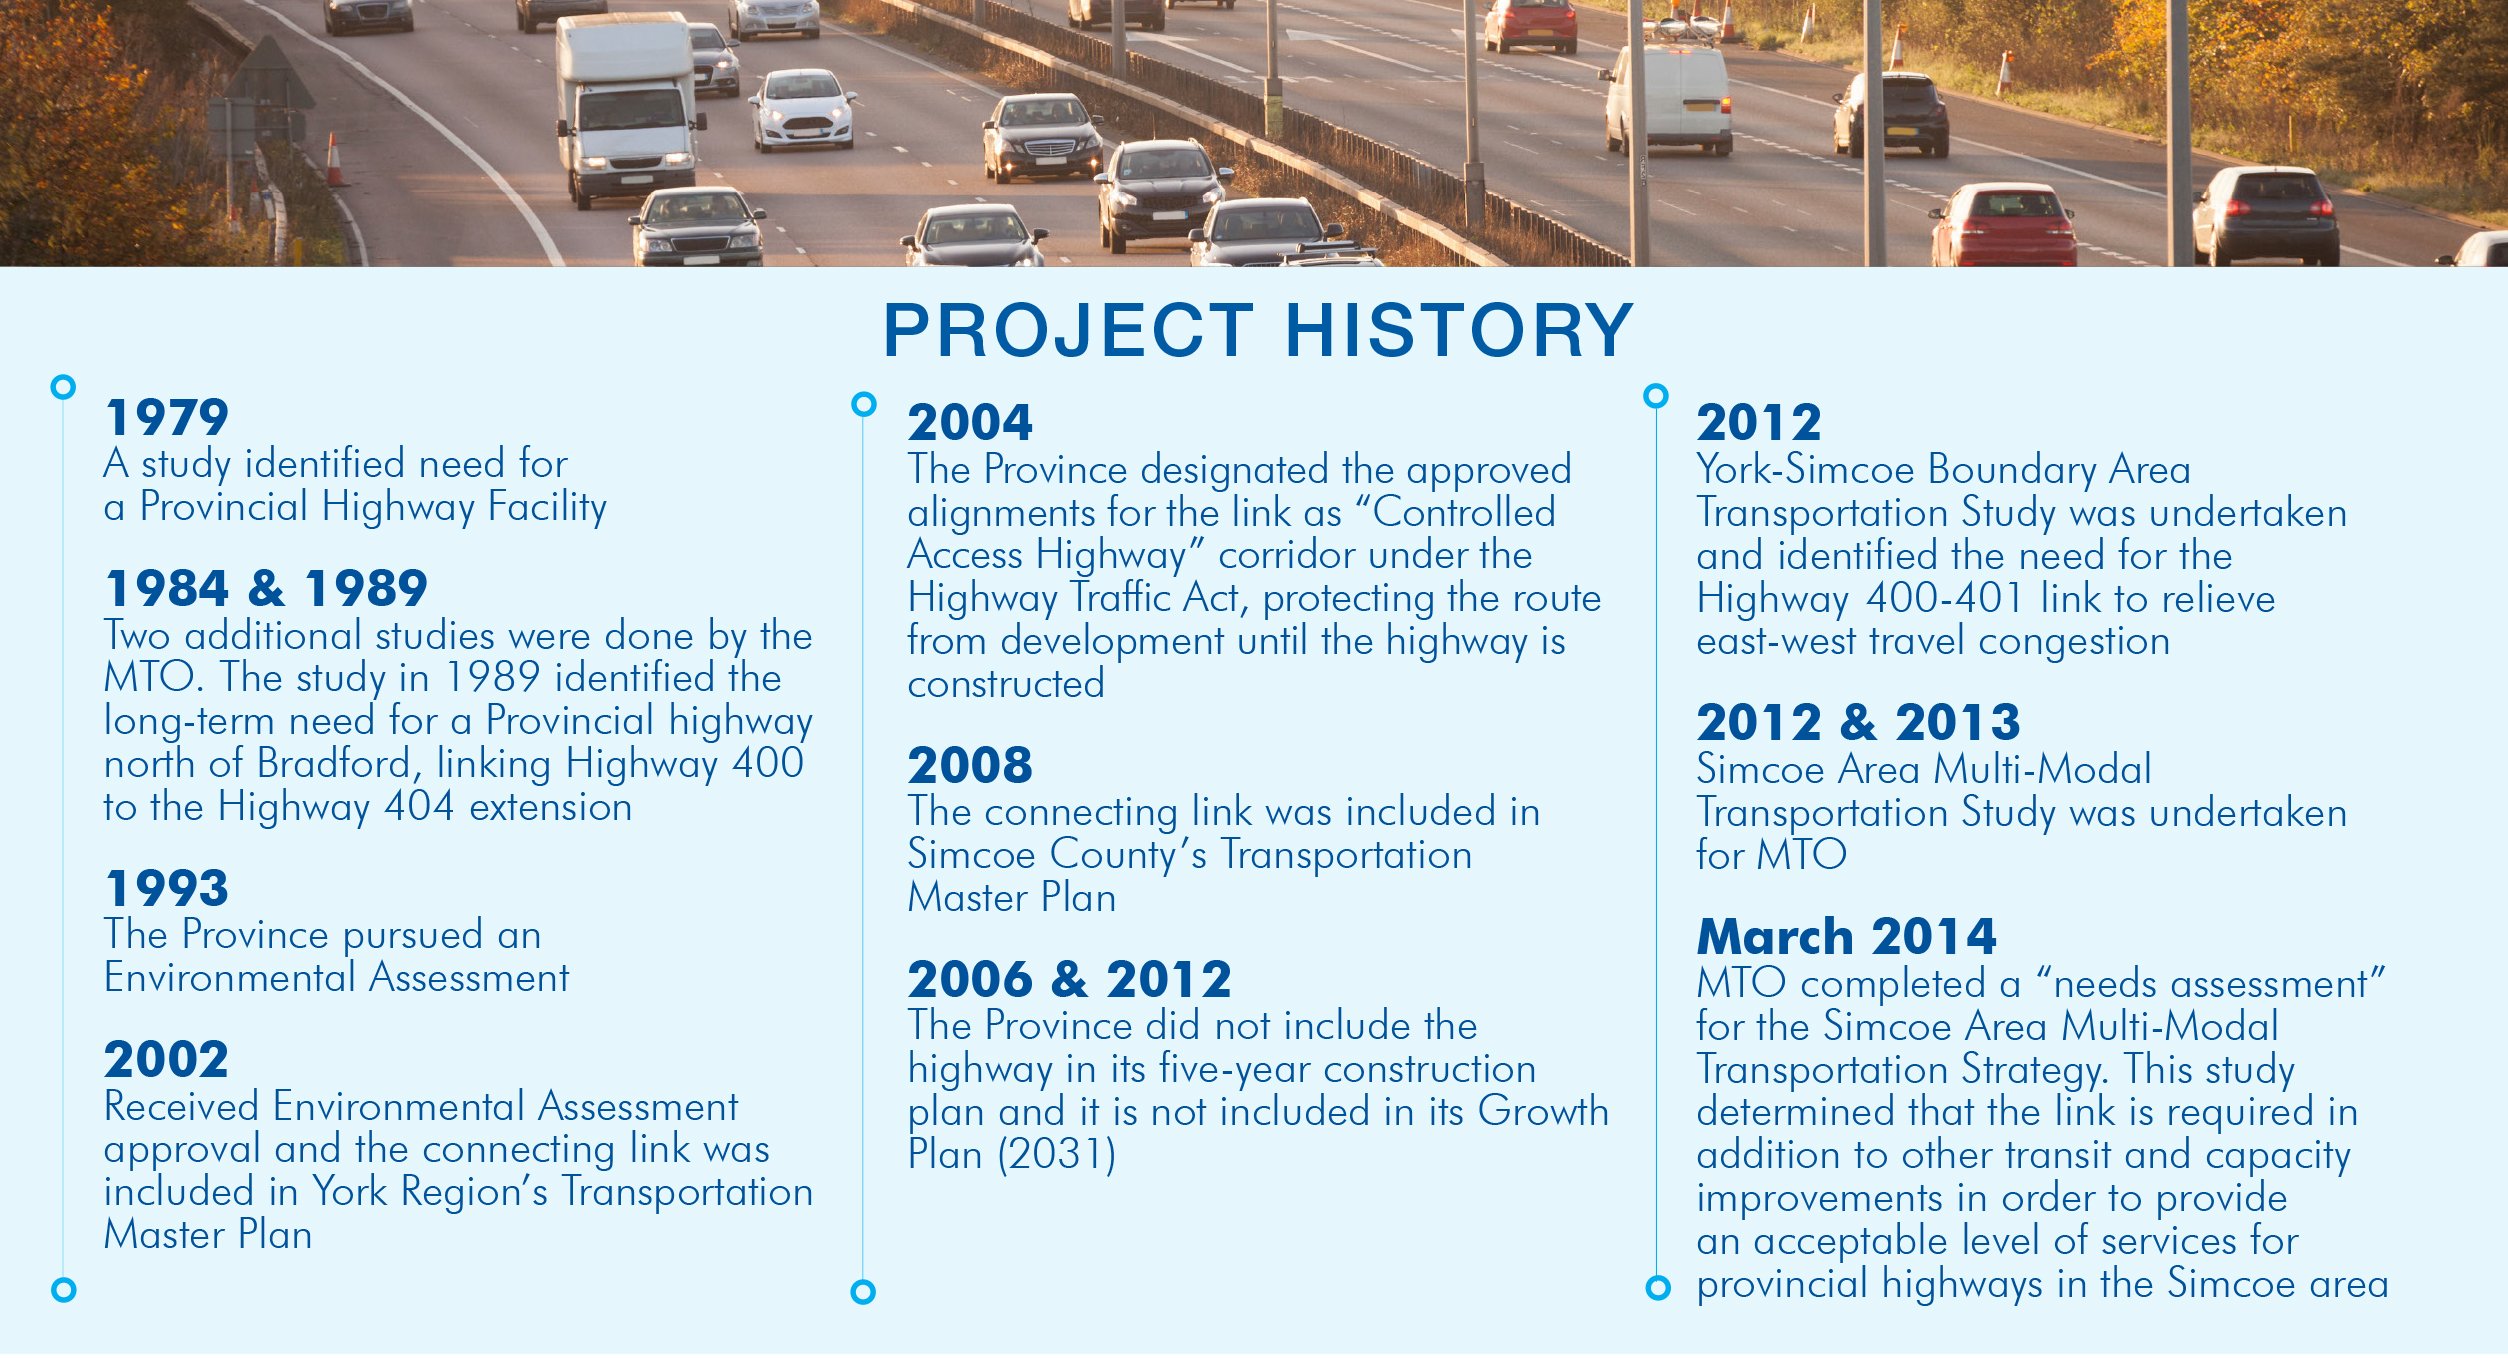 Project History Timeline